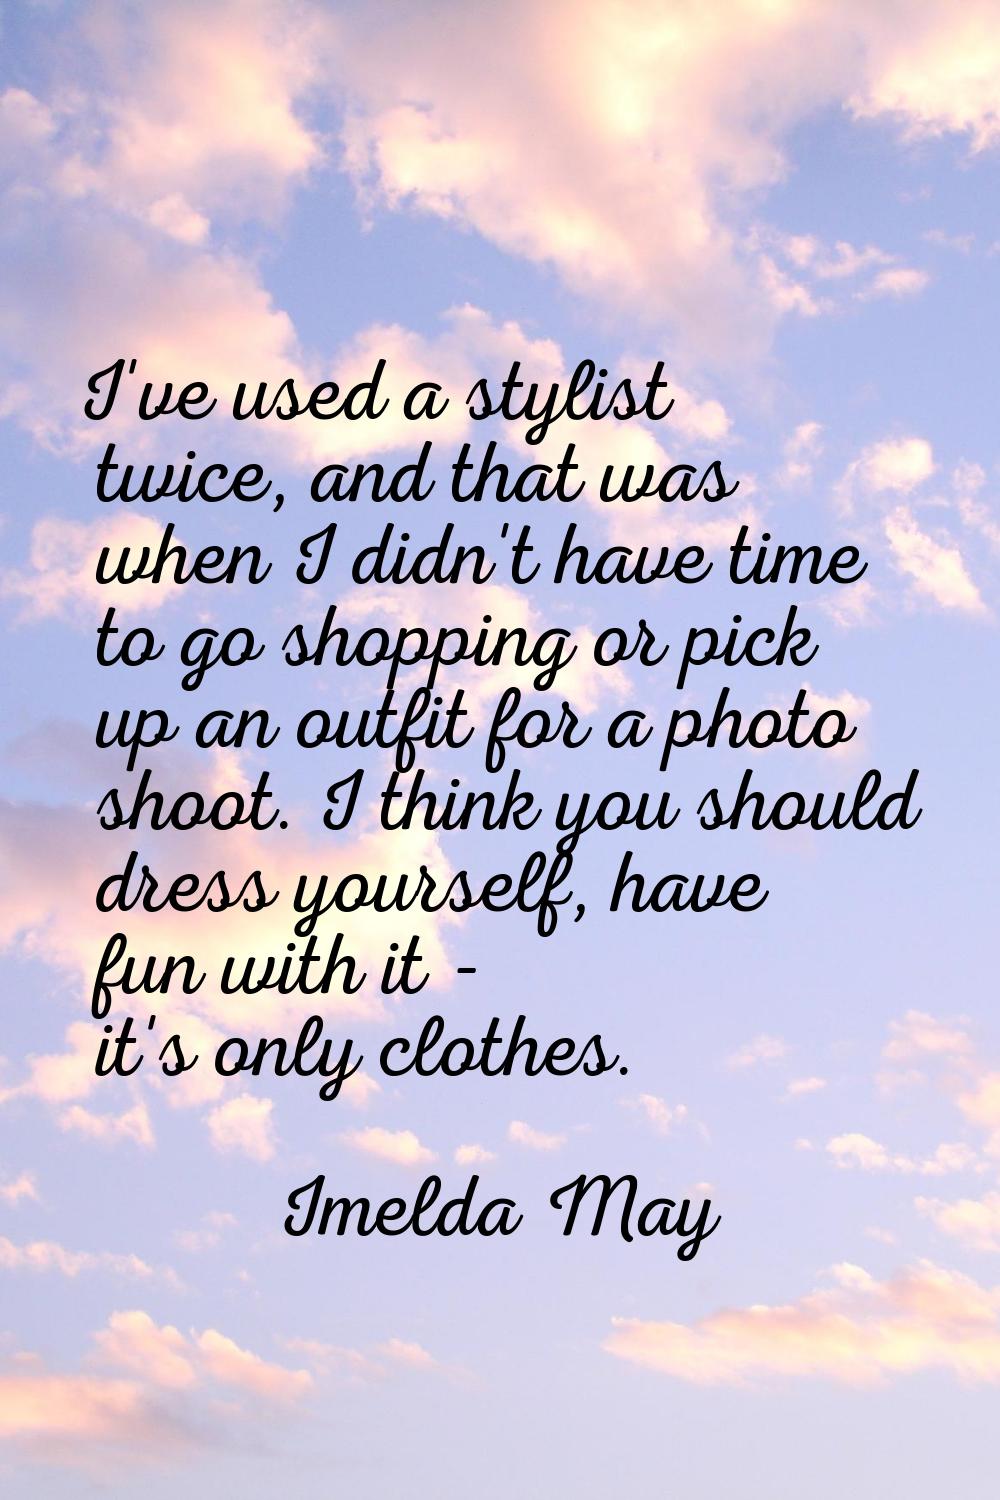 I've used a stylist twice, and that was when I didn't have time to go shopping or pick up an outfit